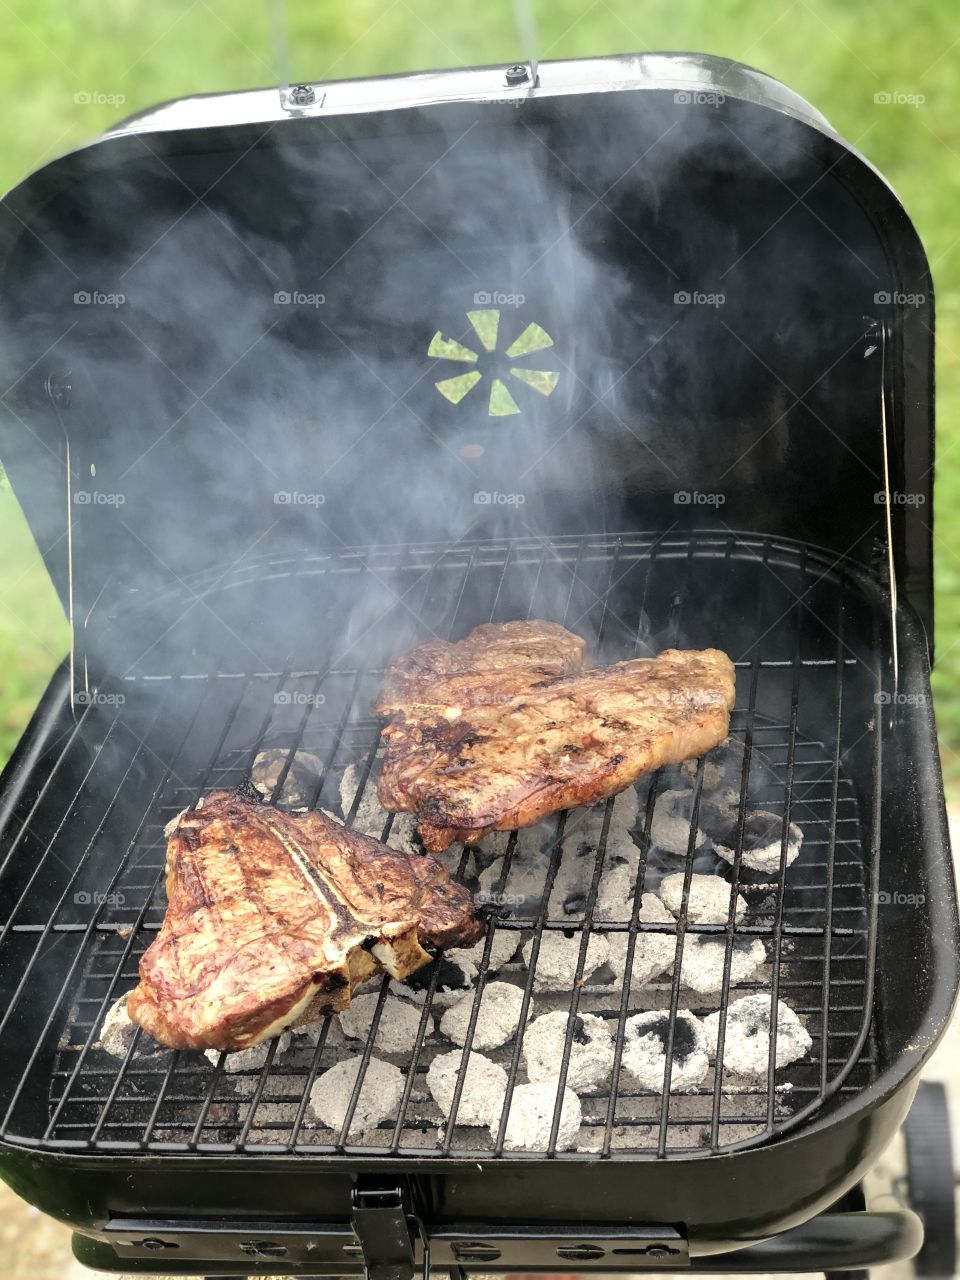 Steak on the grill